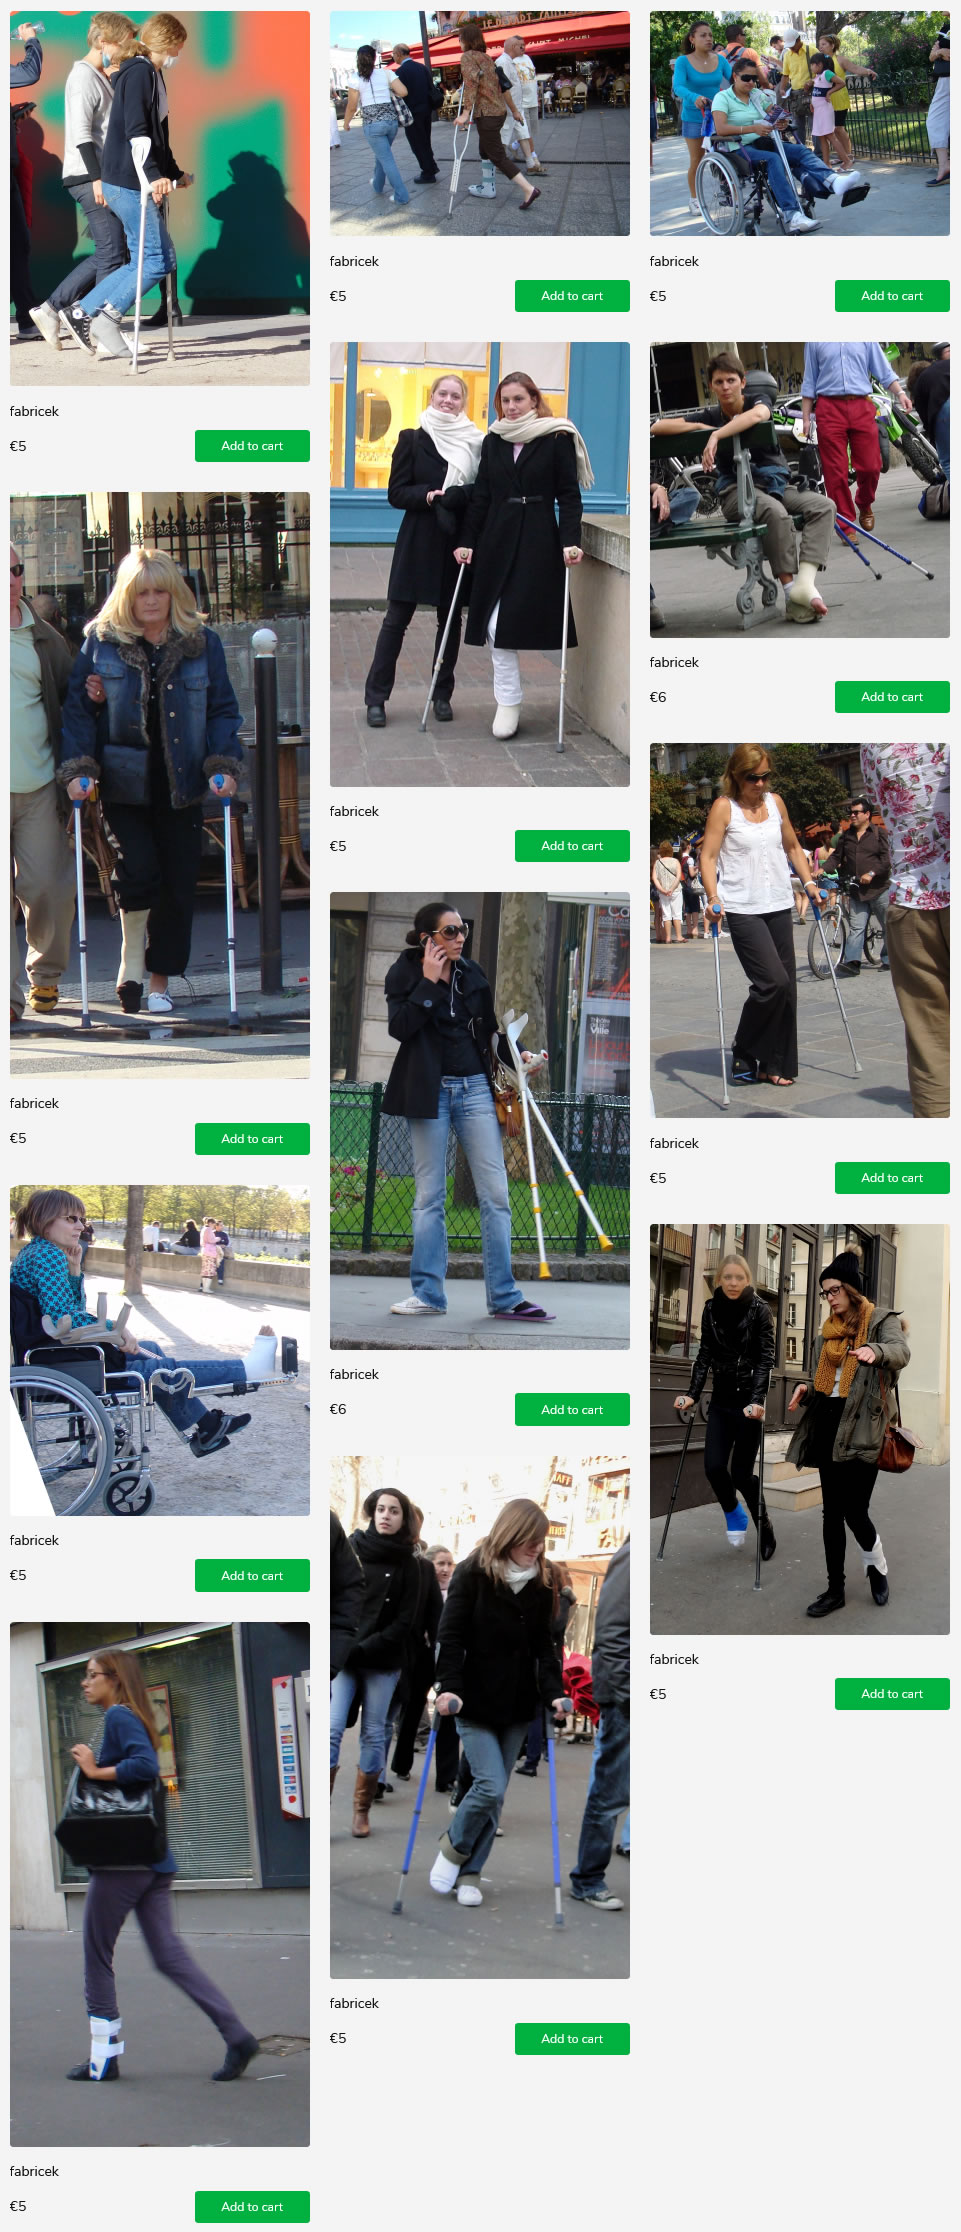 12 sets of javier's models & sightings of french women - wearing casts & braces